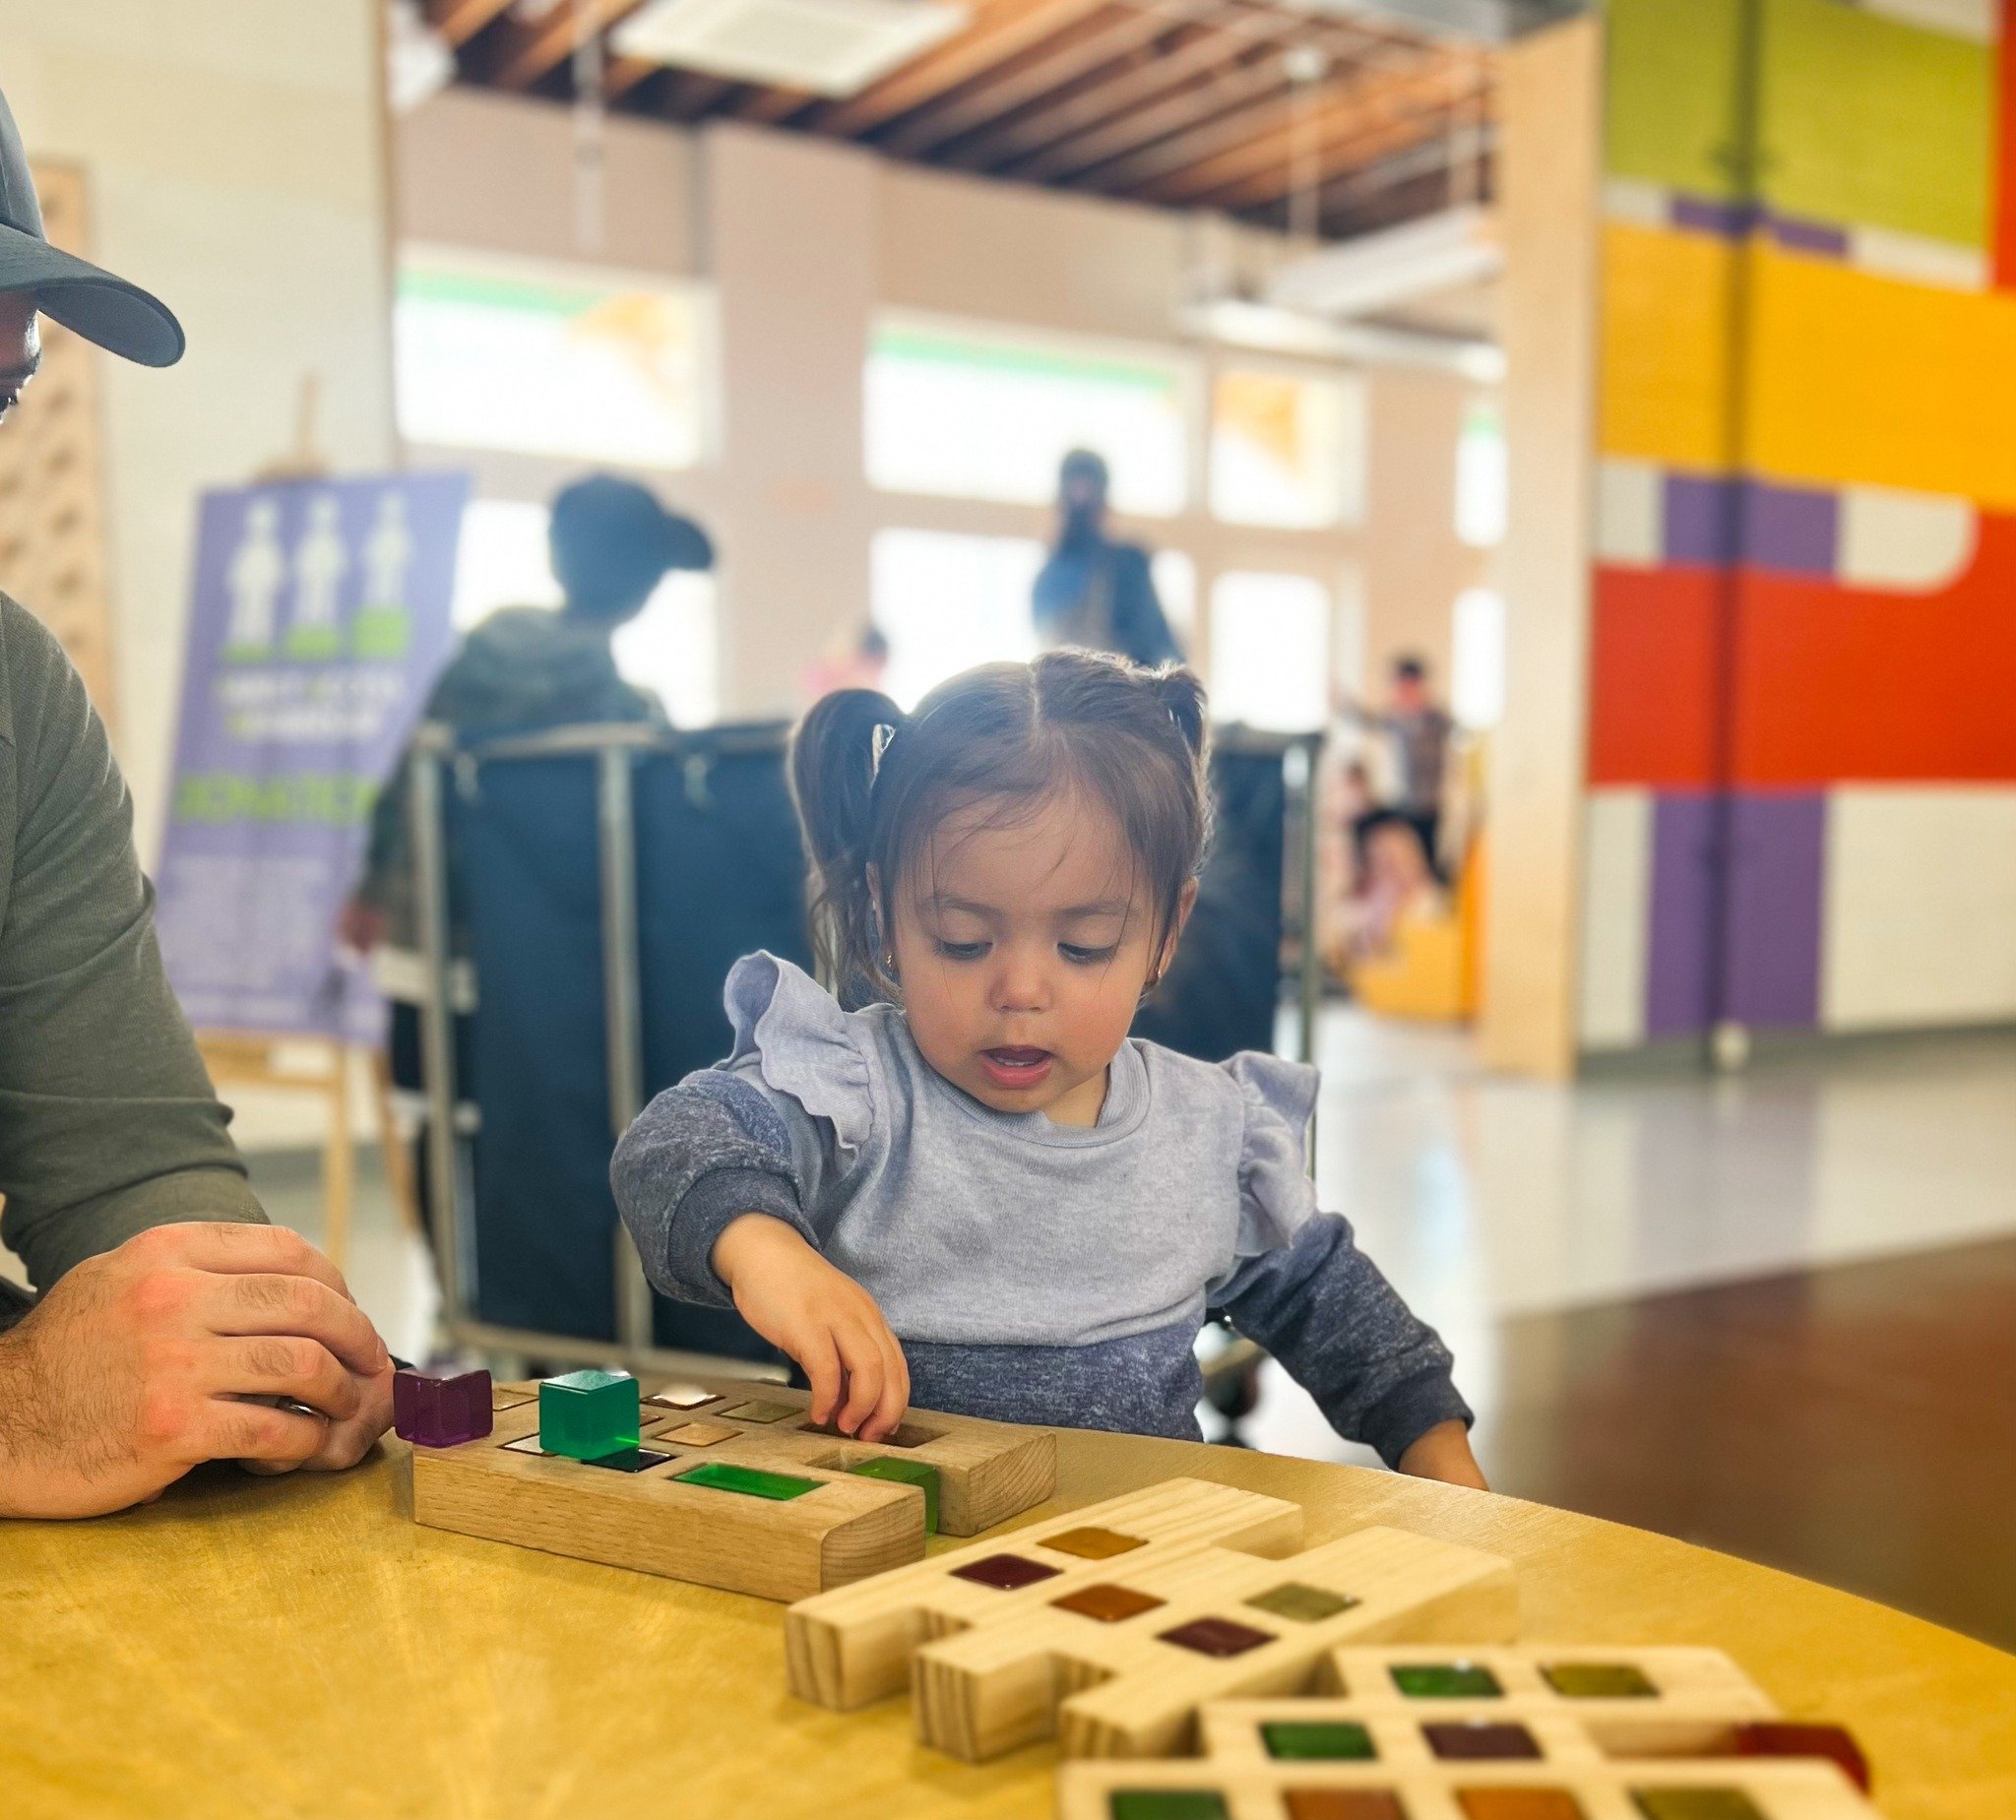 ✨Little Engineer Spotlight✨
.
Discovering and creating at every age here at Westchester Children's Museum! 
.
.
#DiscoverWCM 
#WestchesterChildrensMuseum
#WestchesterFamily
#WestchesterKids
#StemEducation
#PlayToLearn
#ImaginationIsKey
#UseYourImagin